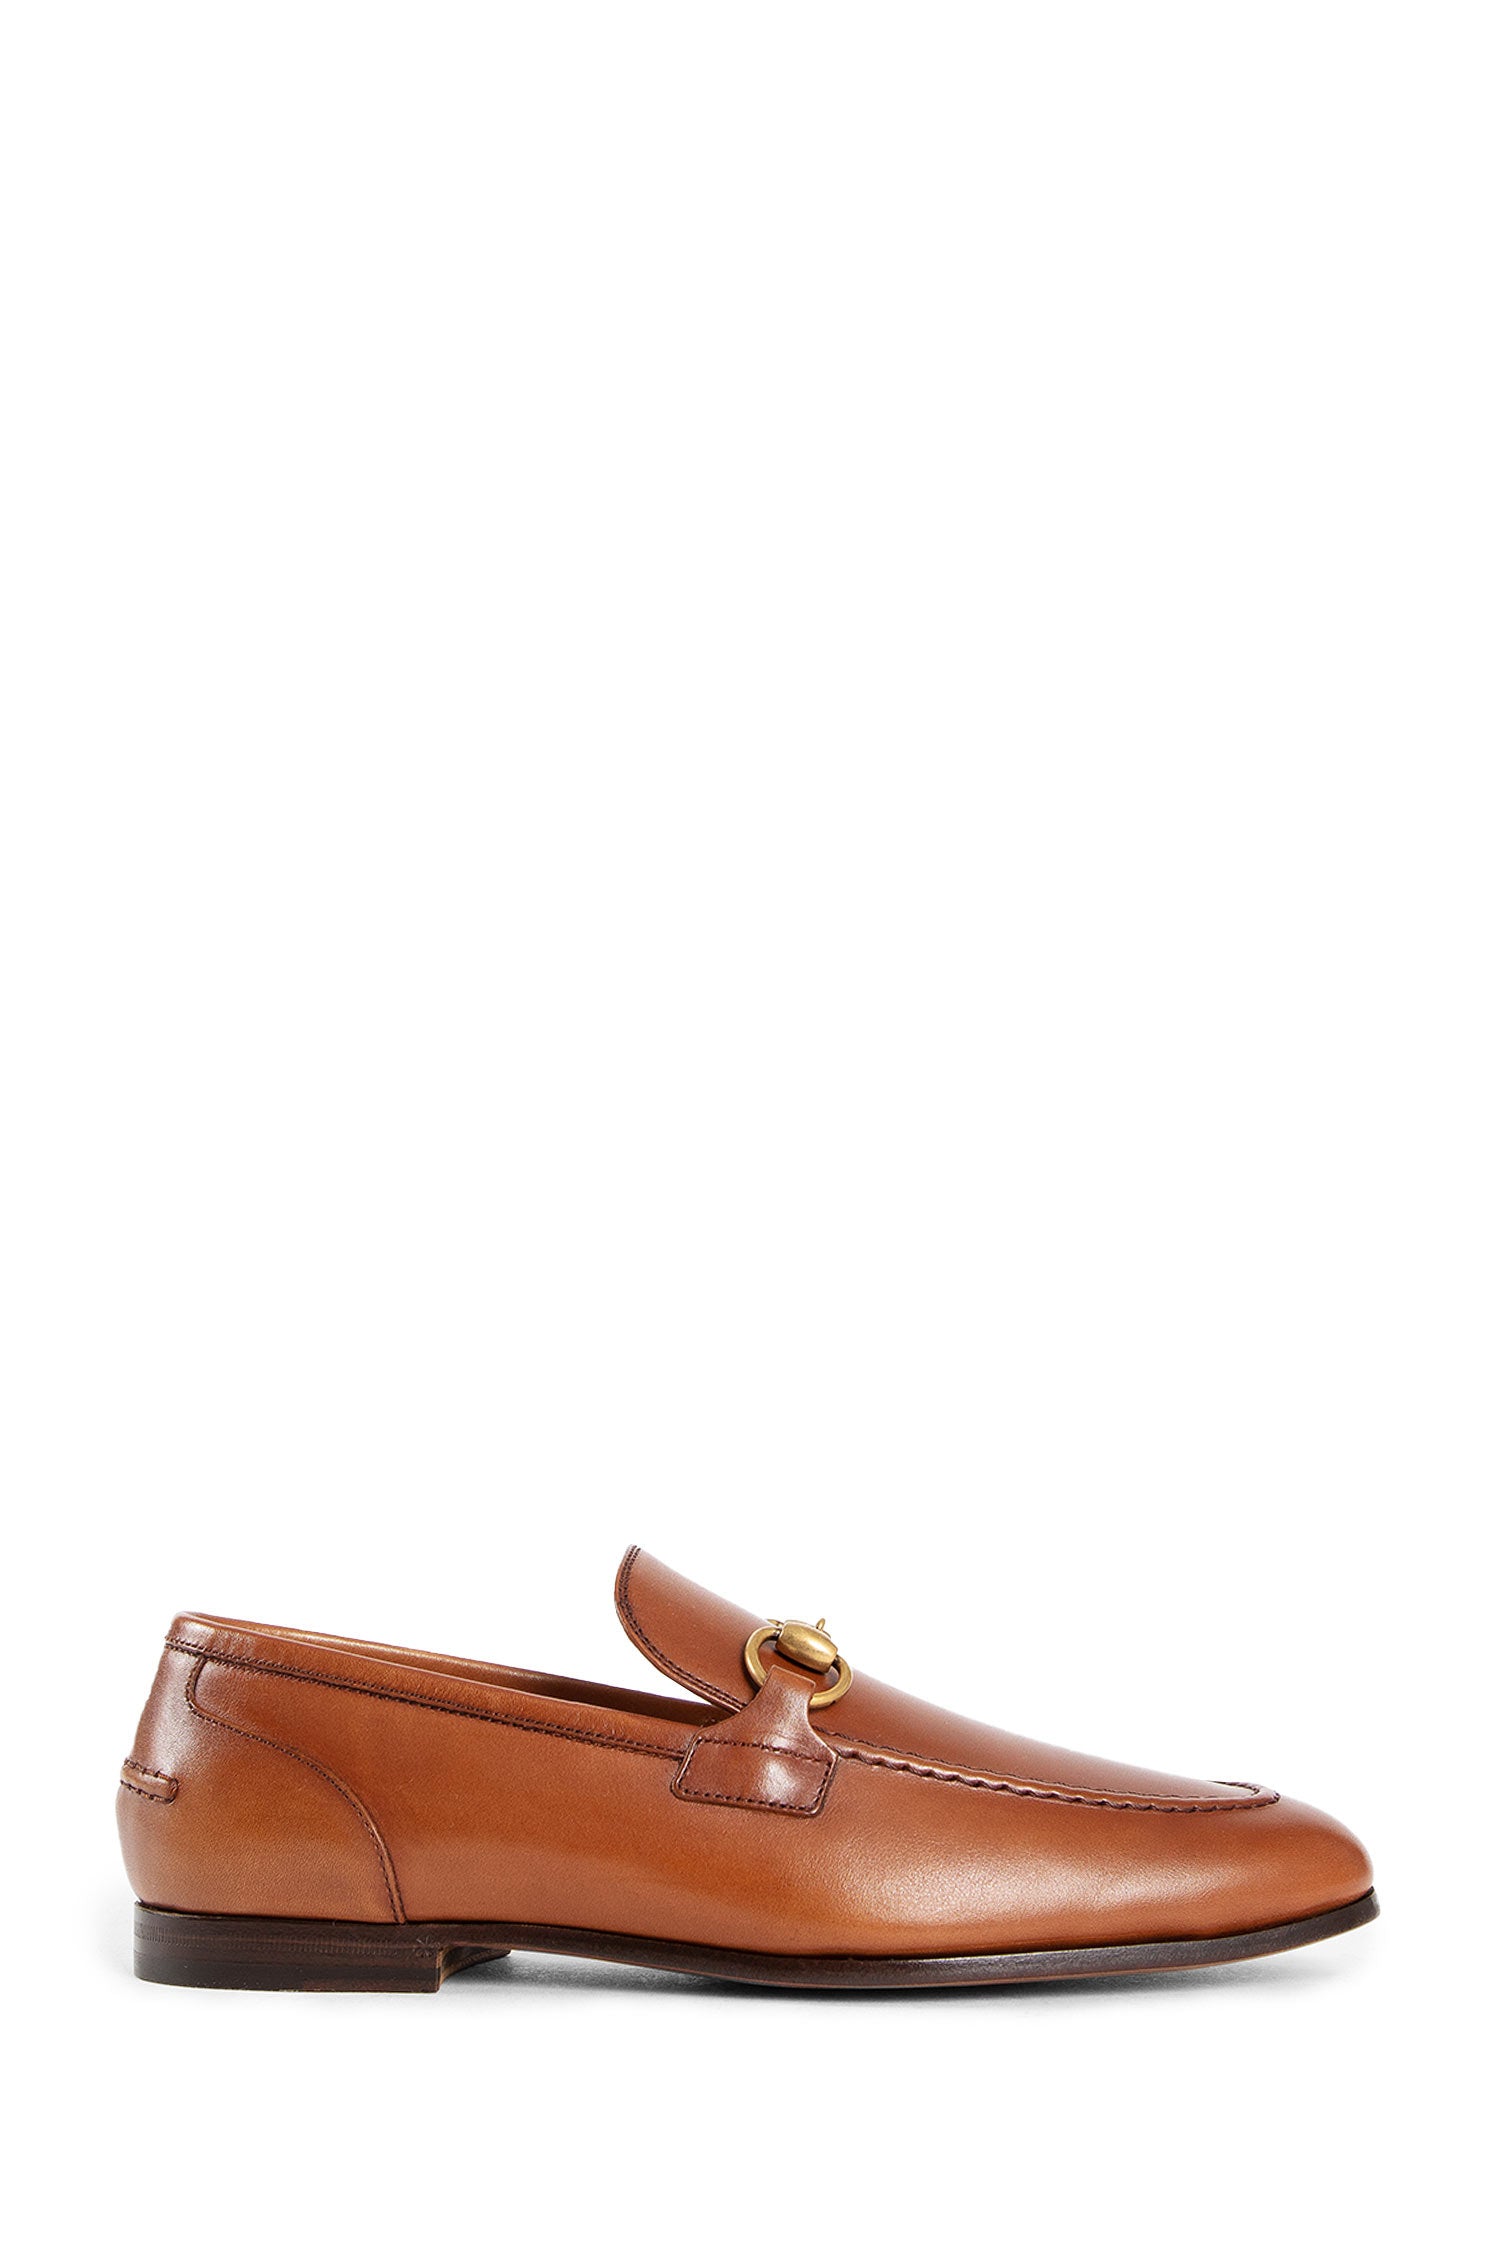 GUCCI MAN BROWN LOAFERS & FLATS